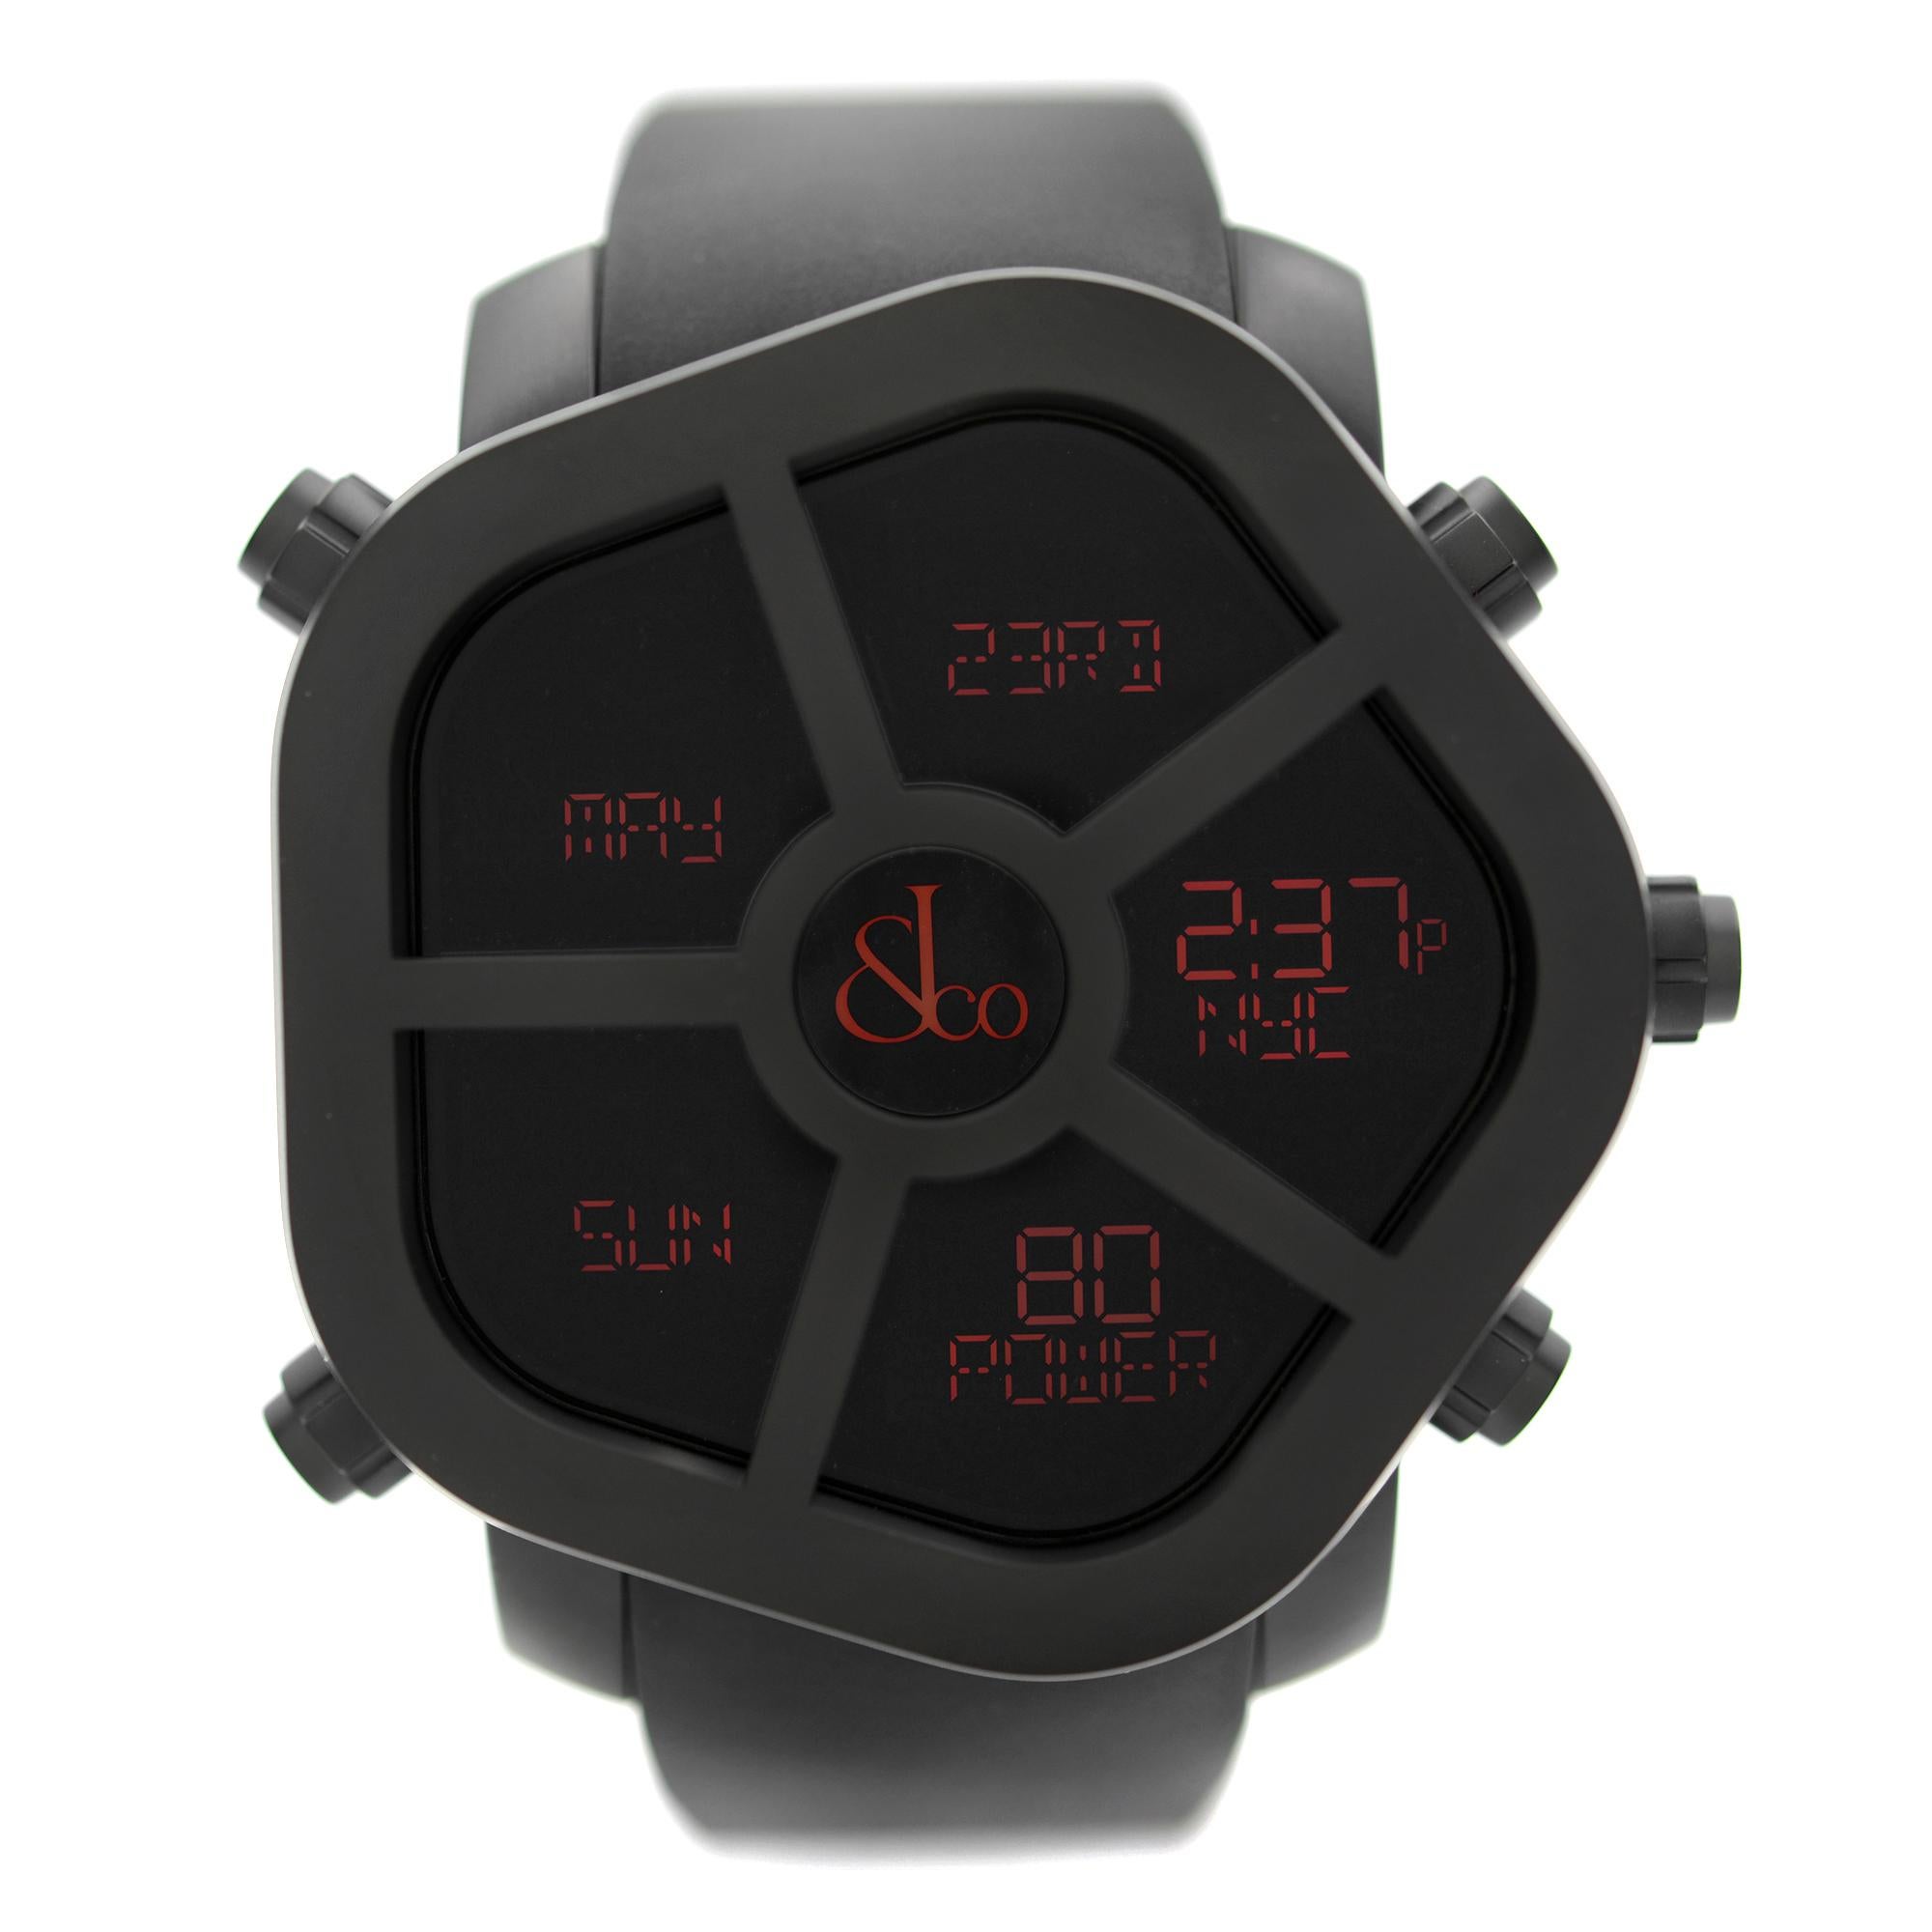 Unworn Jacob & Co. Ghost Steel Black PVD Quartz Men's Watch GH100.11.NS.MB.AHA4D. This Beautiful Timepiece Features: Stainless Steel Case with a Black PVD Coating, Black Vulcanized Rubber Strap, Interchangeable Carbon Fiber Bezel (Black), Five